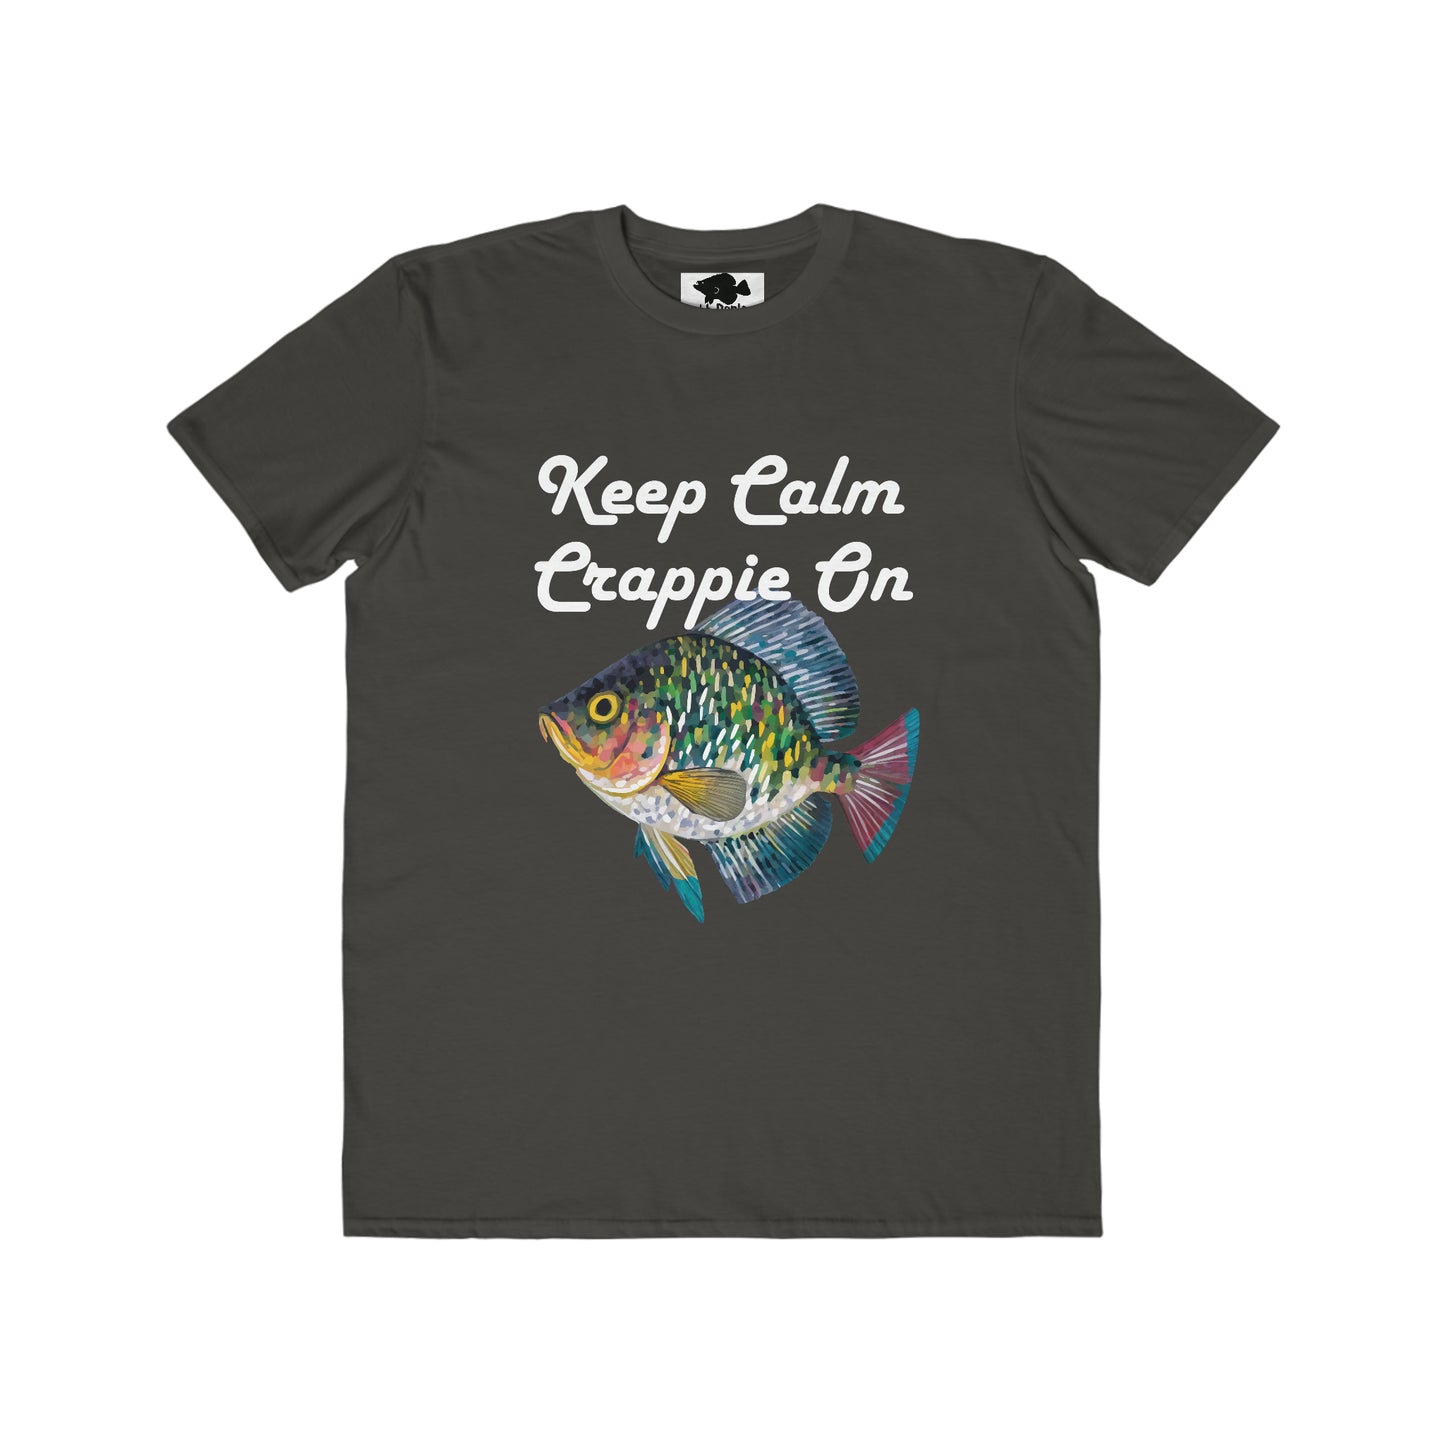 Crappie Fishing Apparel, Crappie Shirt, Keep Calm Crappie On